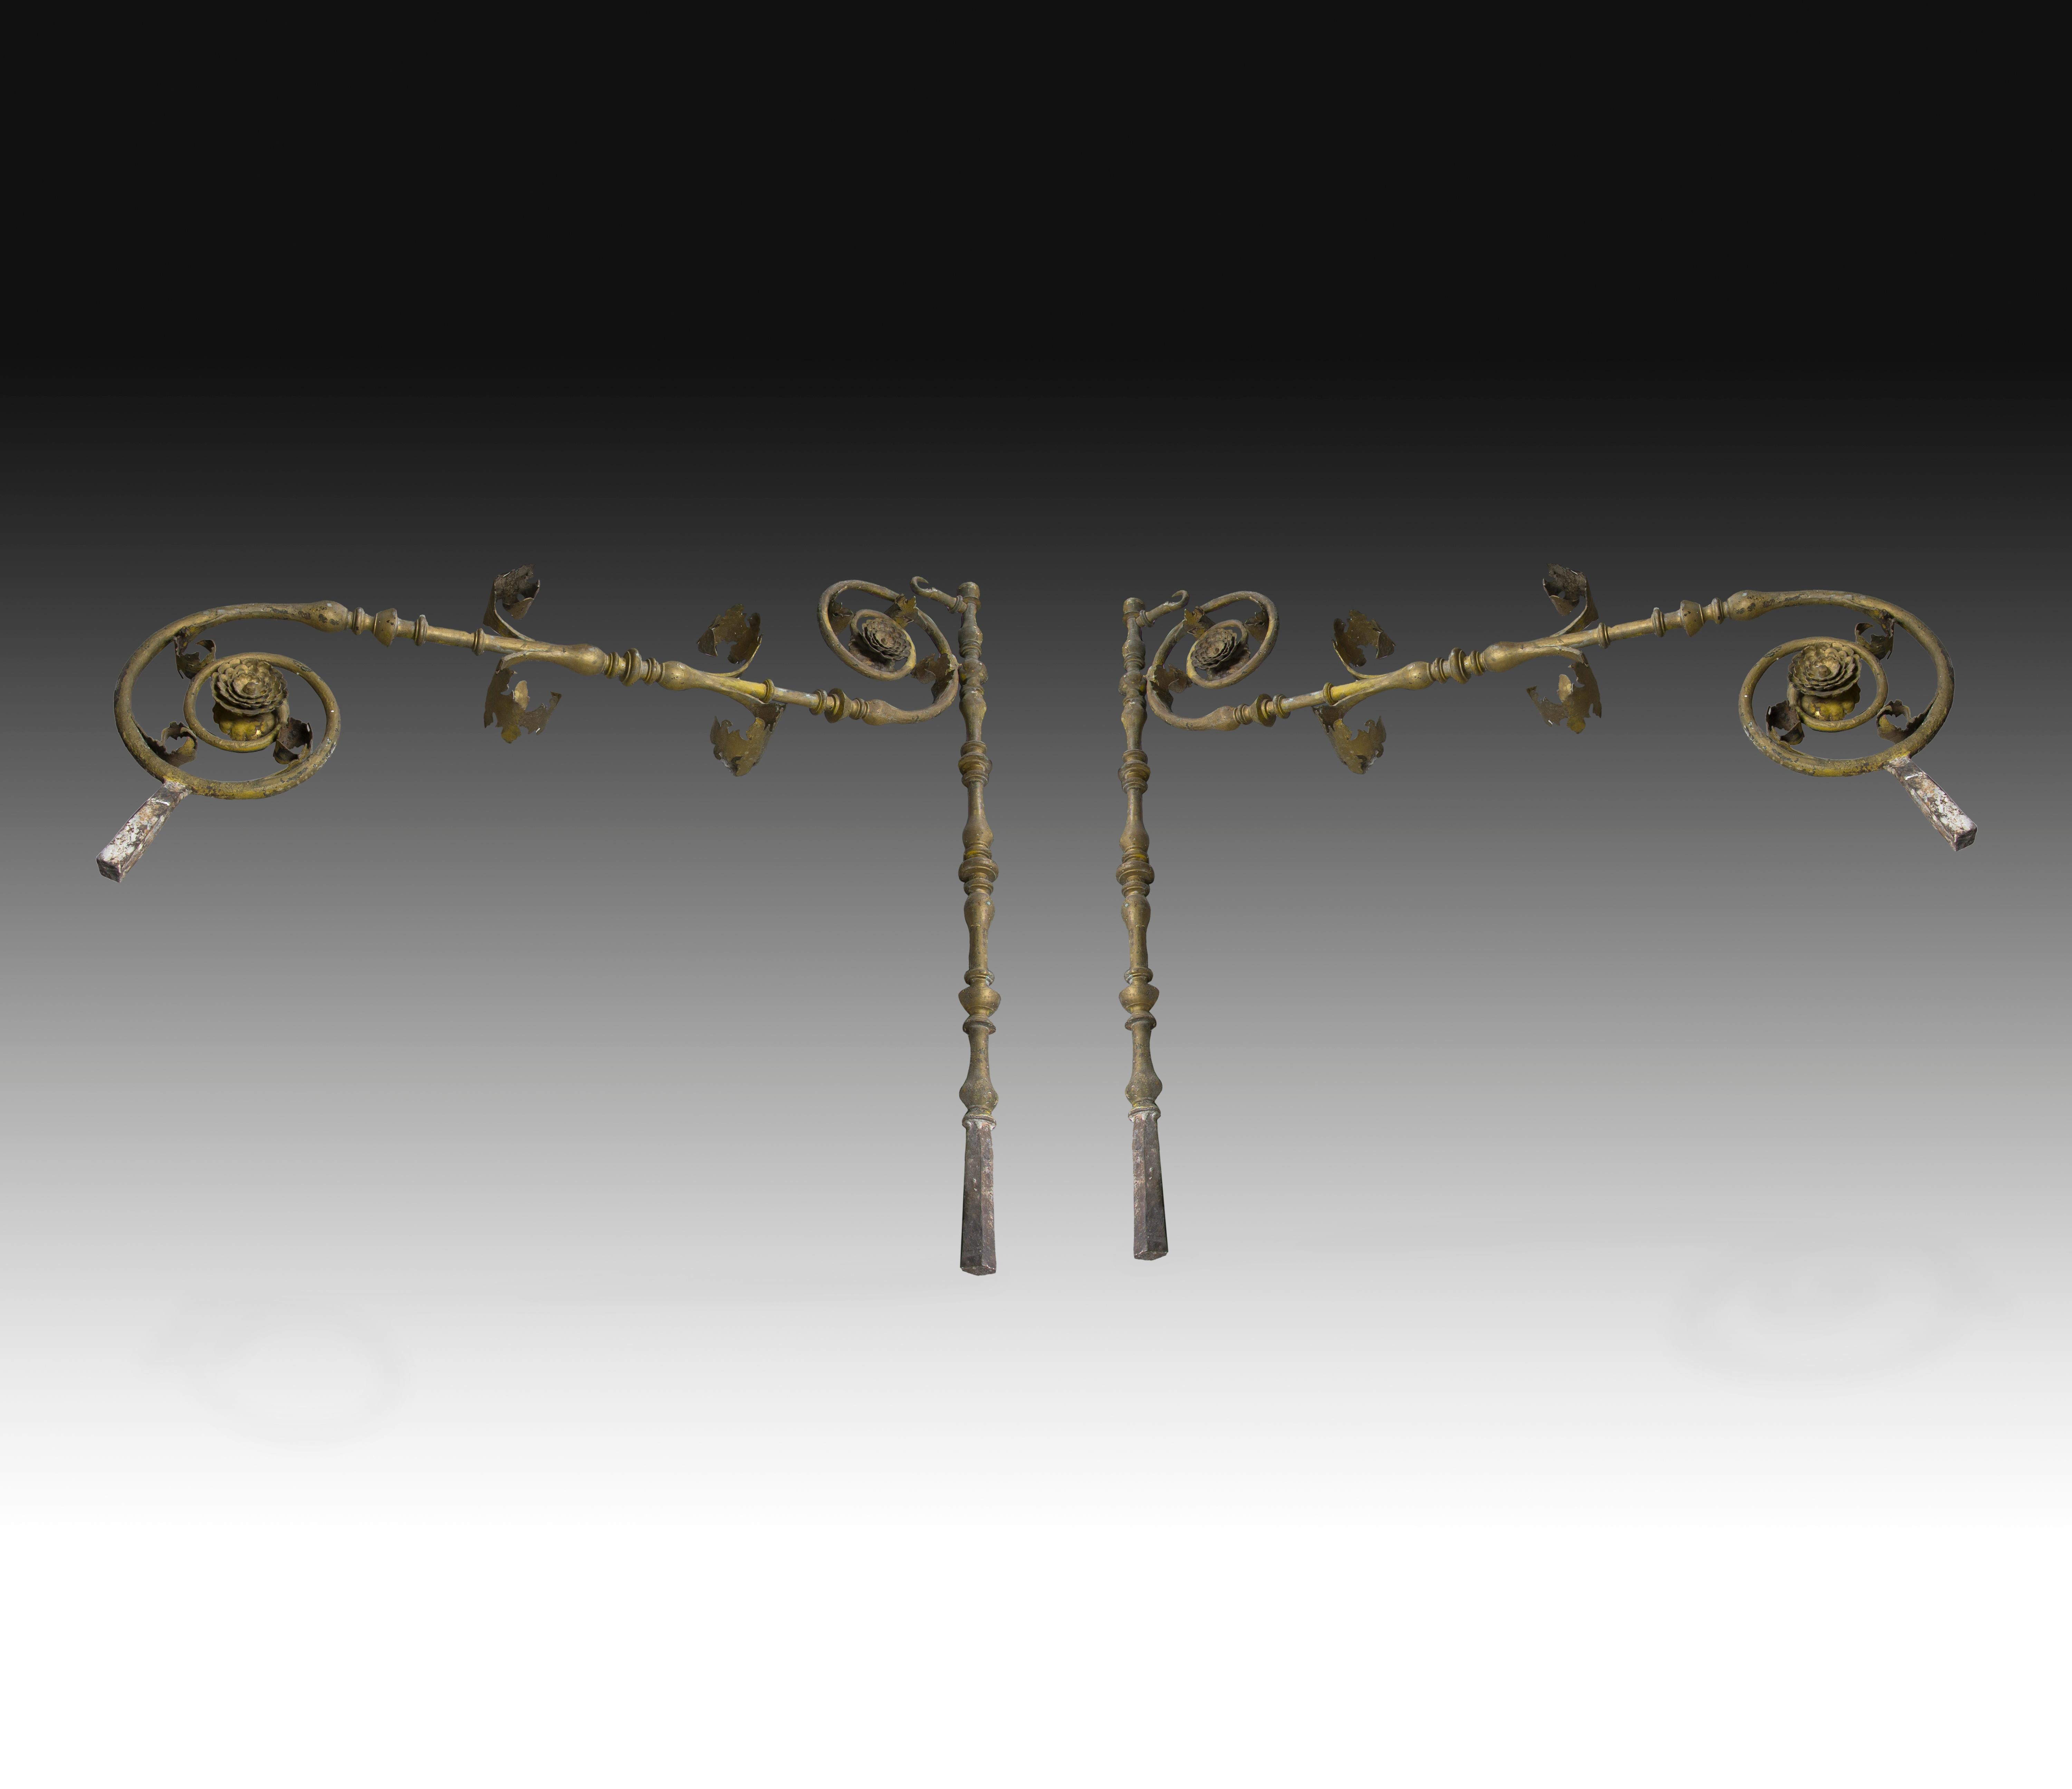 Pair of iron supports with a baluster shaped shaft, with curves and moldings reminiscent of Baroque works, and leaves, flowers and curves more related to Neoclassicism or Classical influences, with two bif flowers that might show some influence from